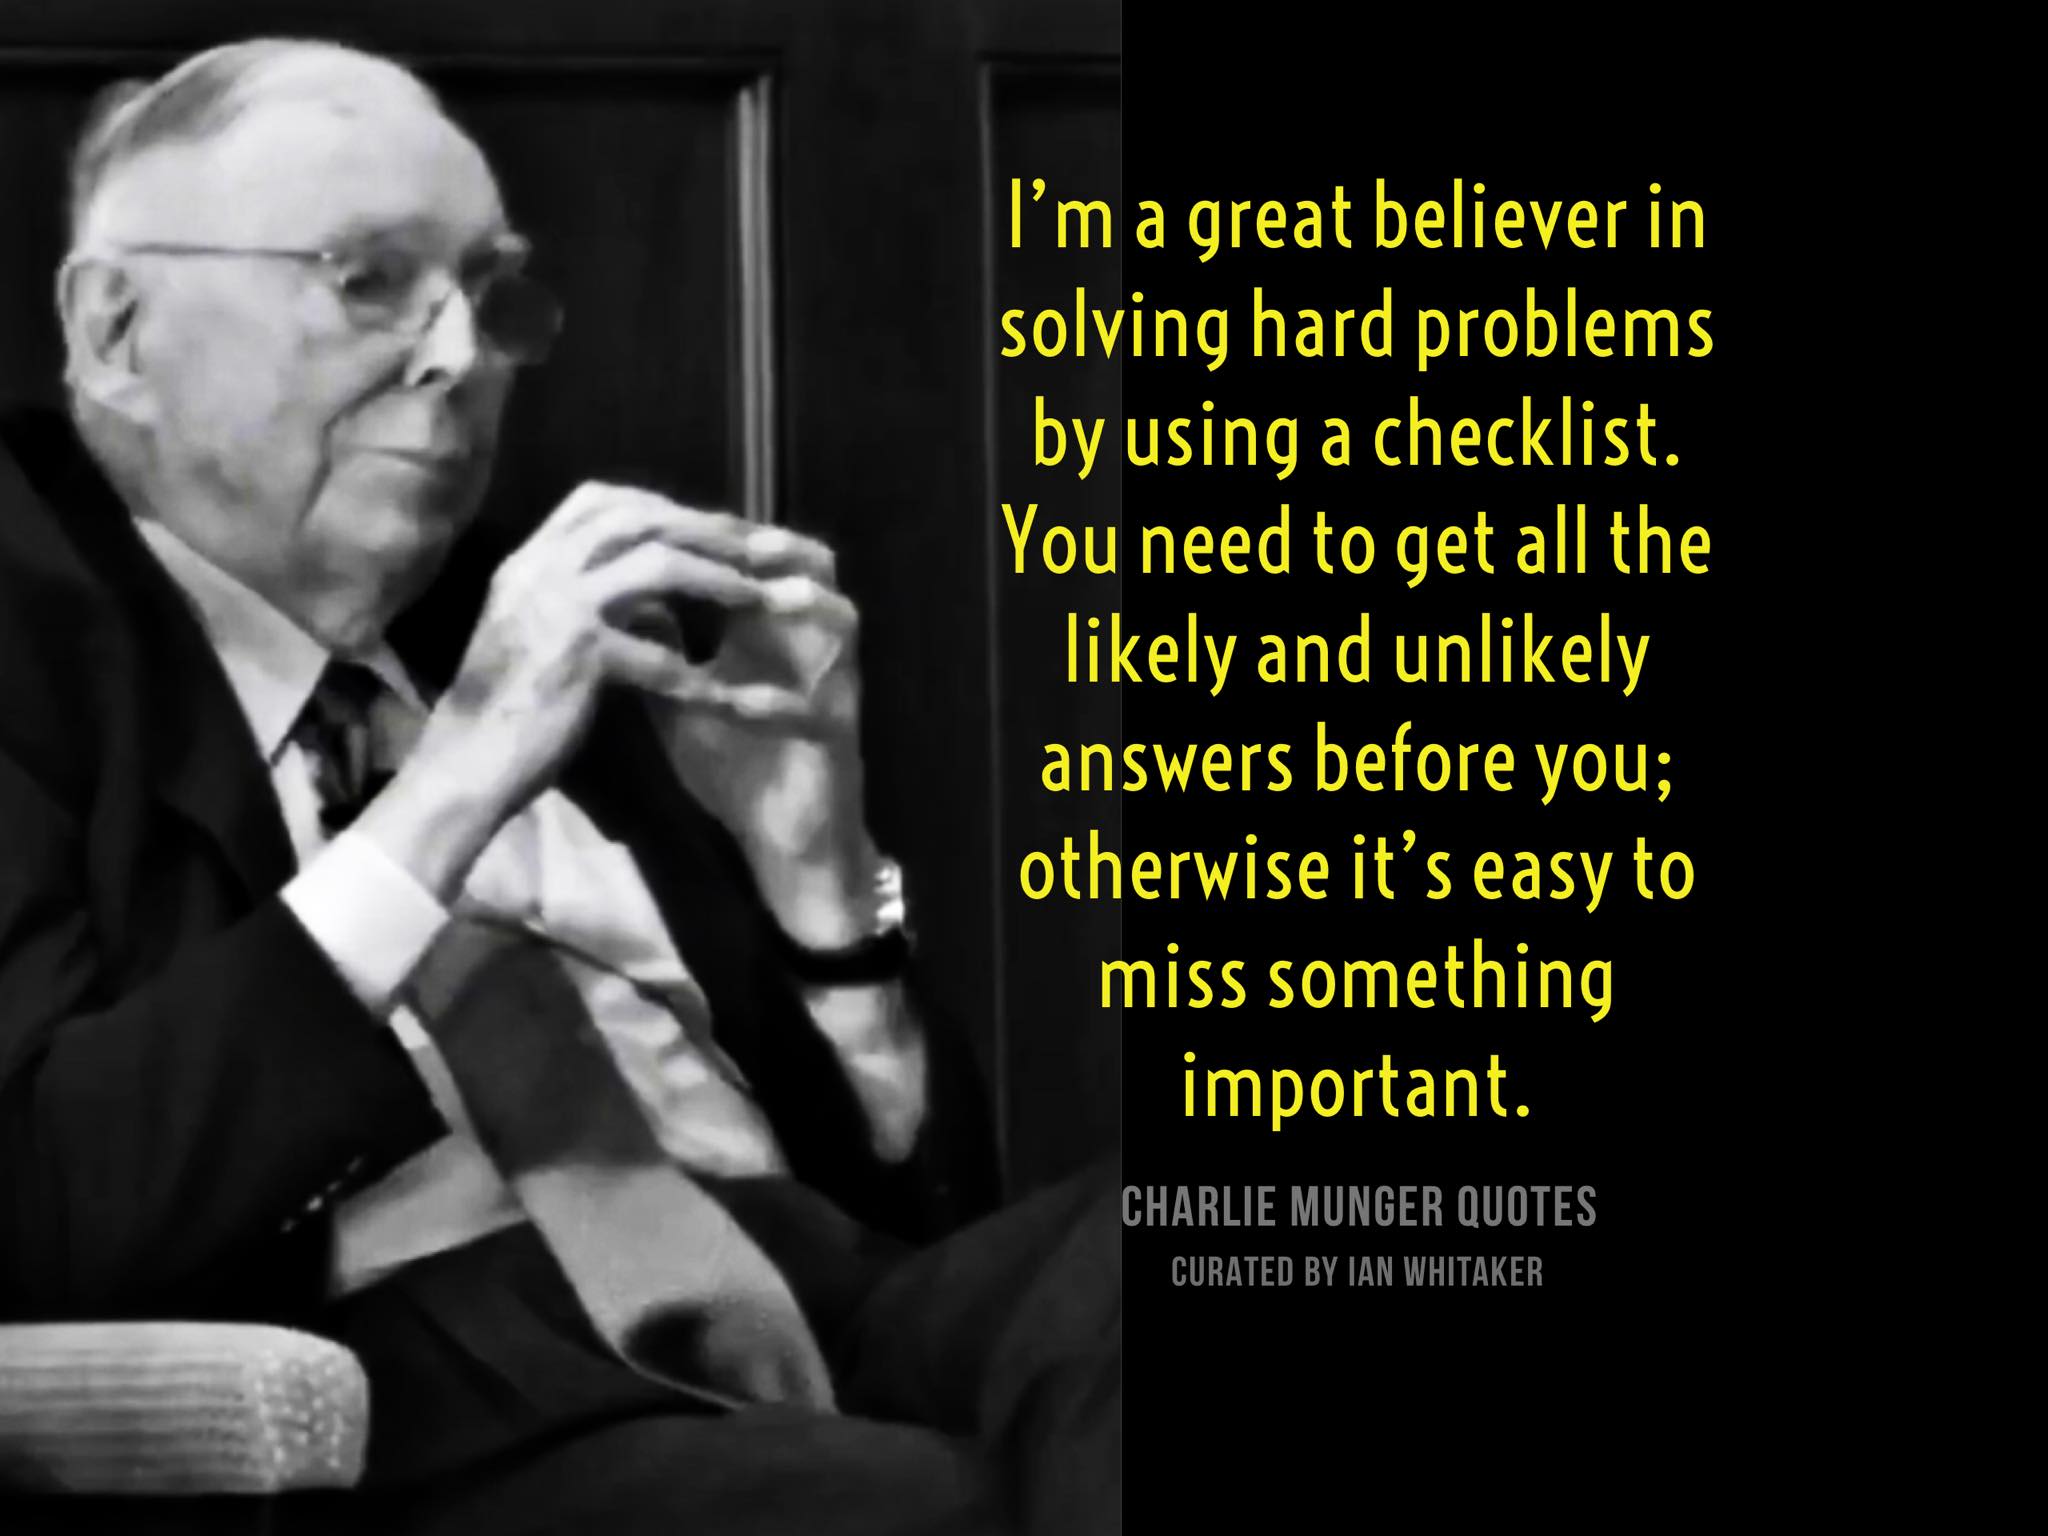 Checklis Charlie Munger Quotes Curated By Ian Whitaker